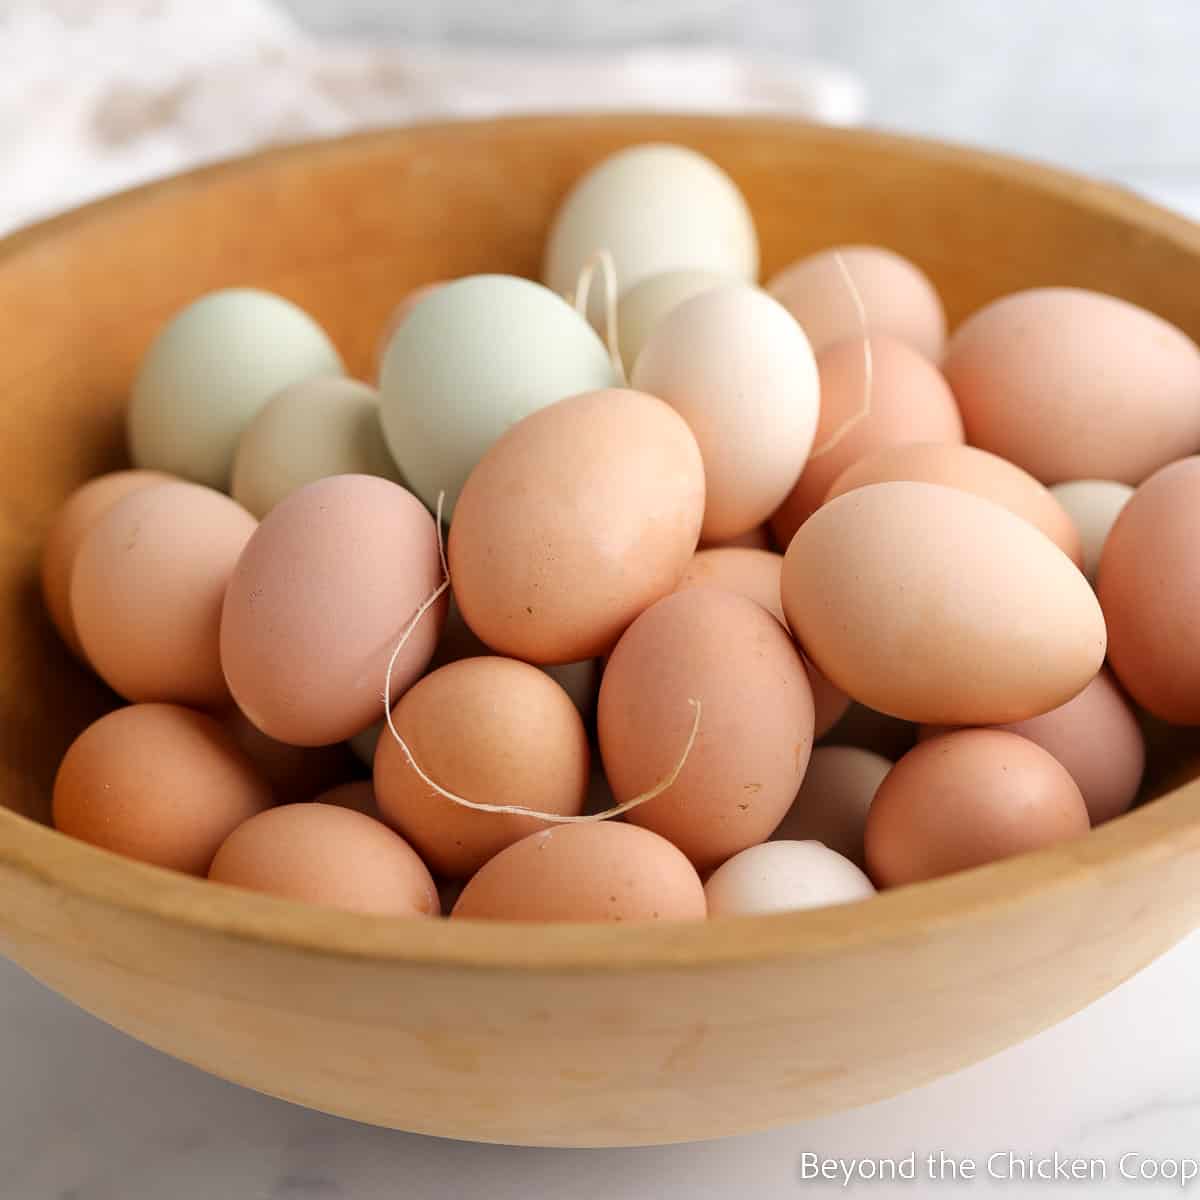 A wooden bowl filled with fresh chicken eggs.